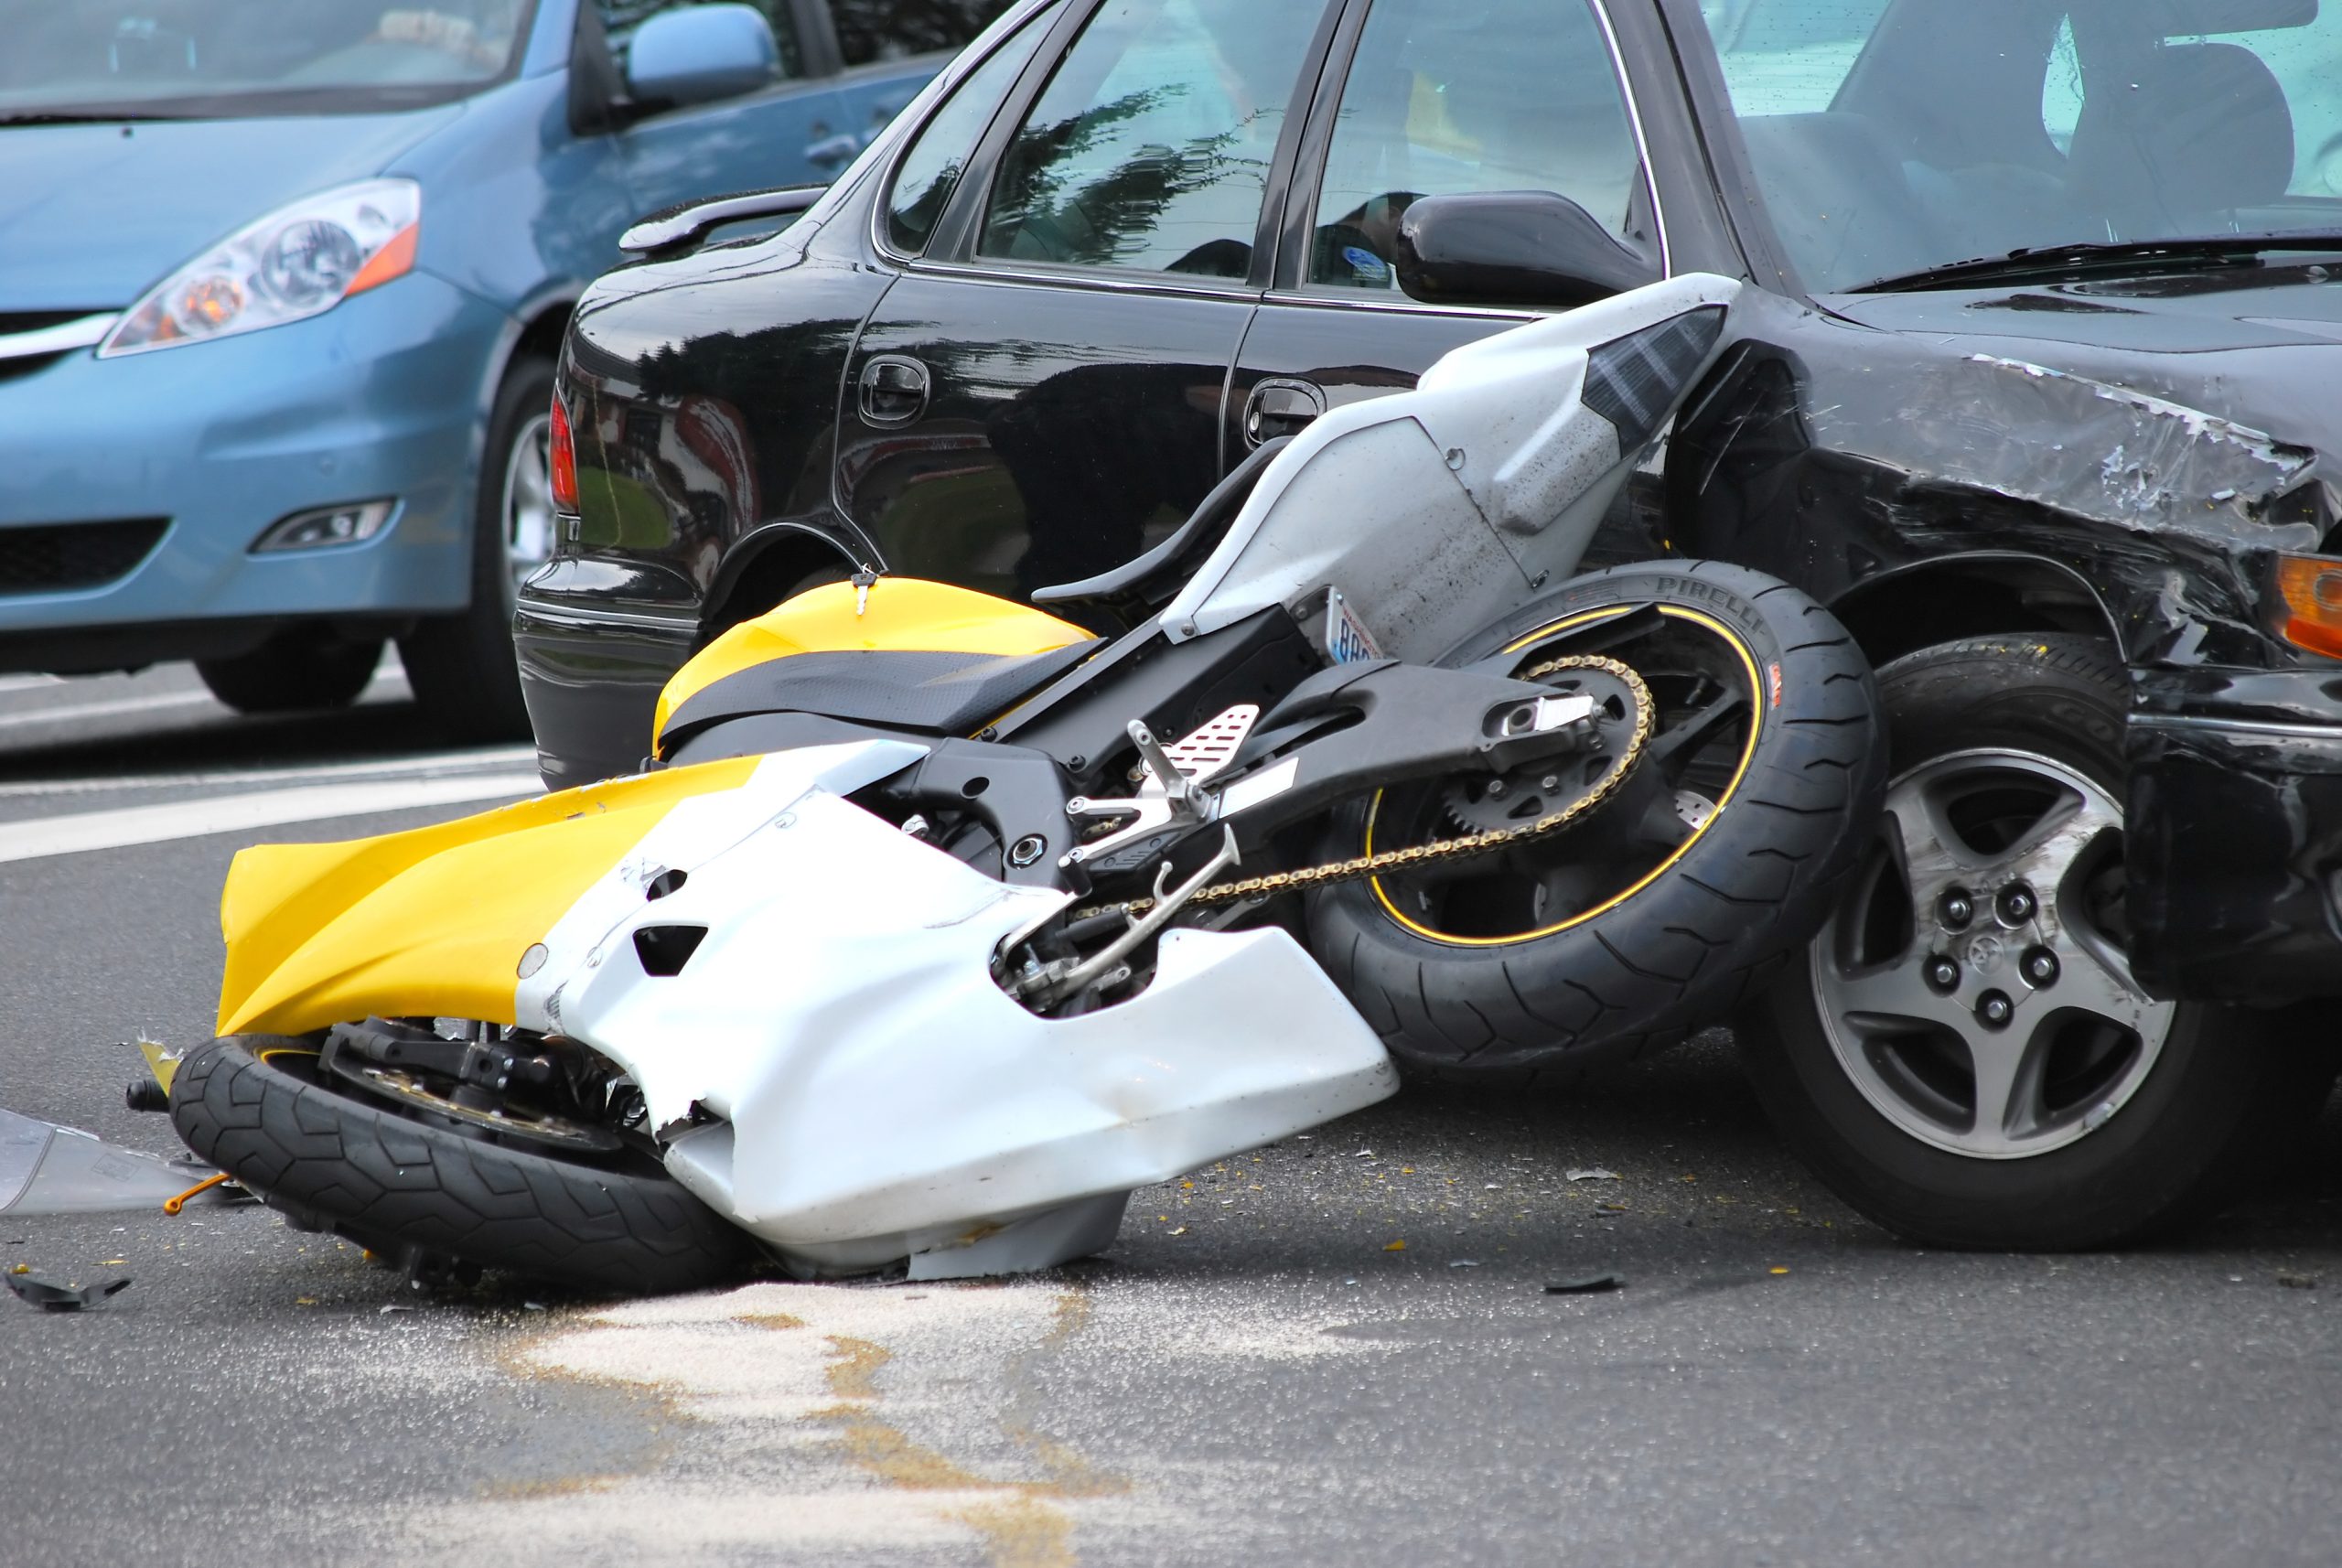 Hiring a Lawyer After Being Injured in a Motorcycle Accident in Colonie, New York